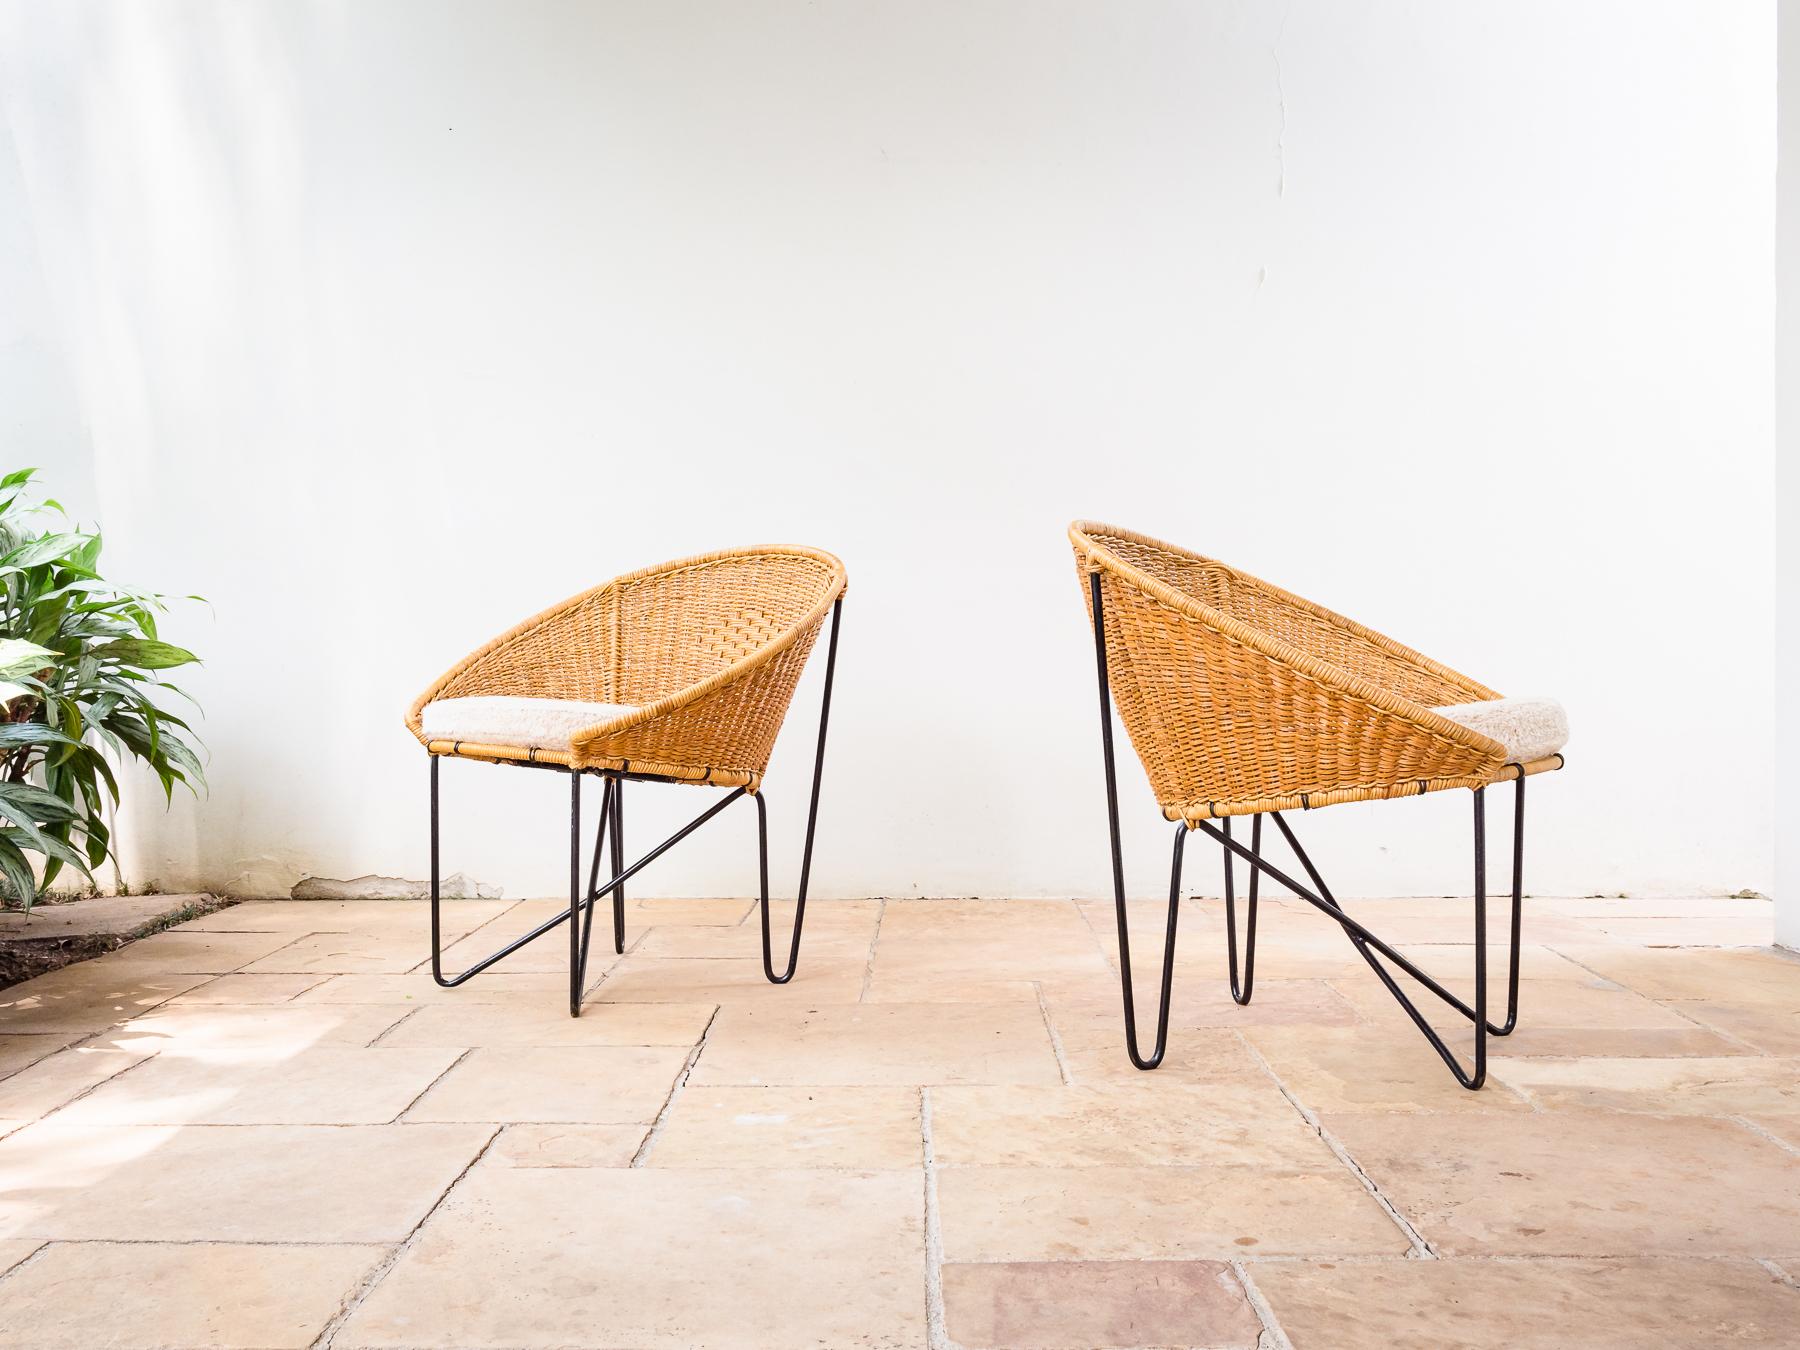 Brazilian Mid-Century Modern pair of wrought iron and reed lounge chairs by José Zanine Caldas, designed and produced in the 1950s.
These amazing chairs were originally designed to be done in nylon cords, but we have four of them that were a custom